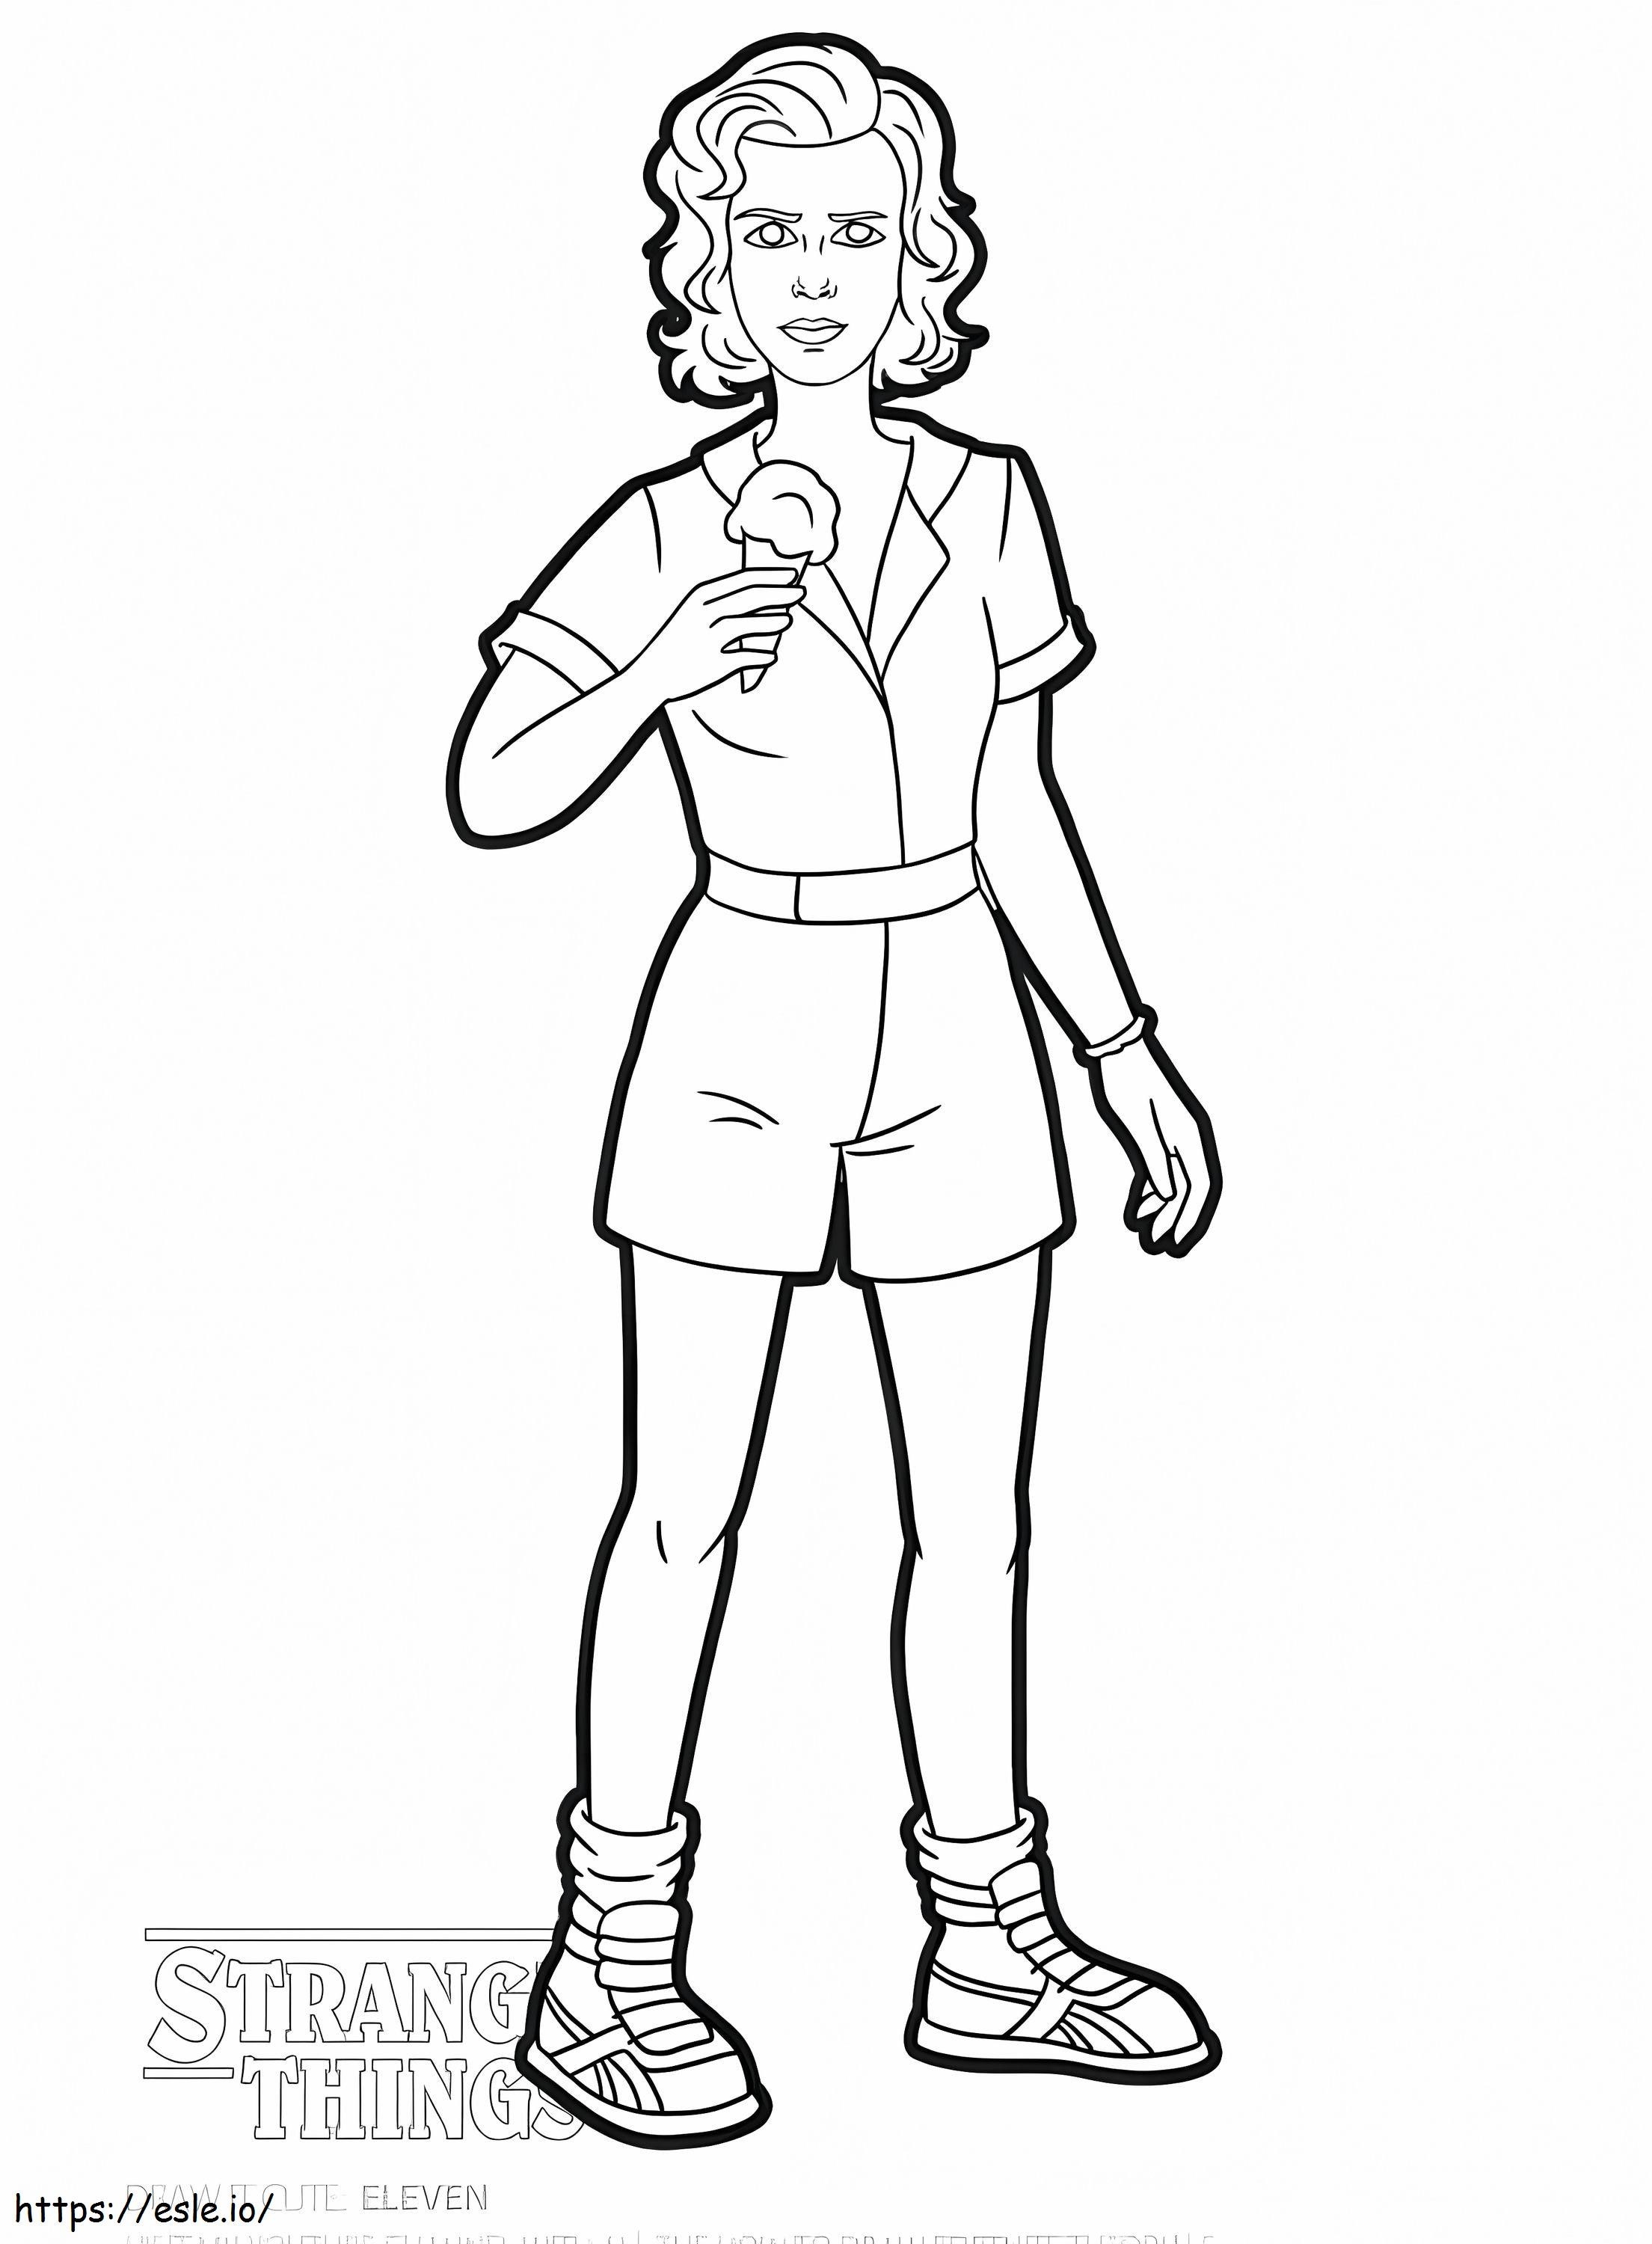 Stranger Things 1 754x1024 Coloring Page